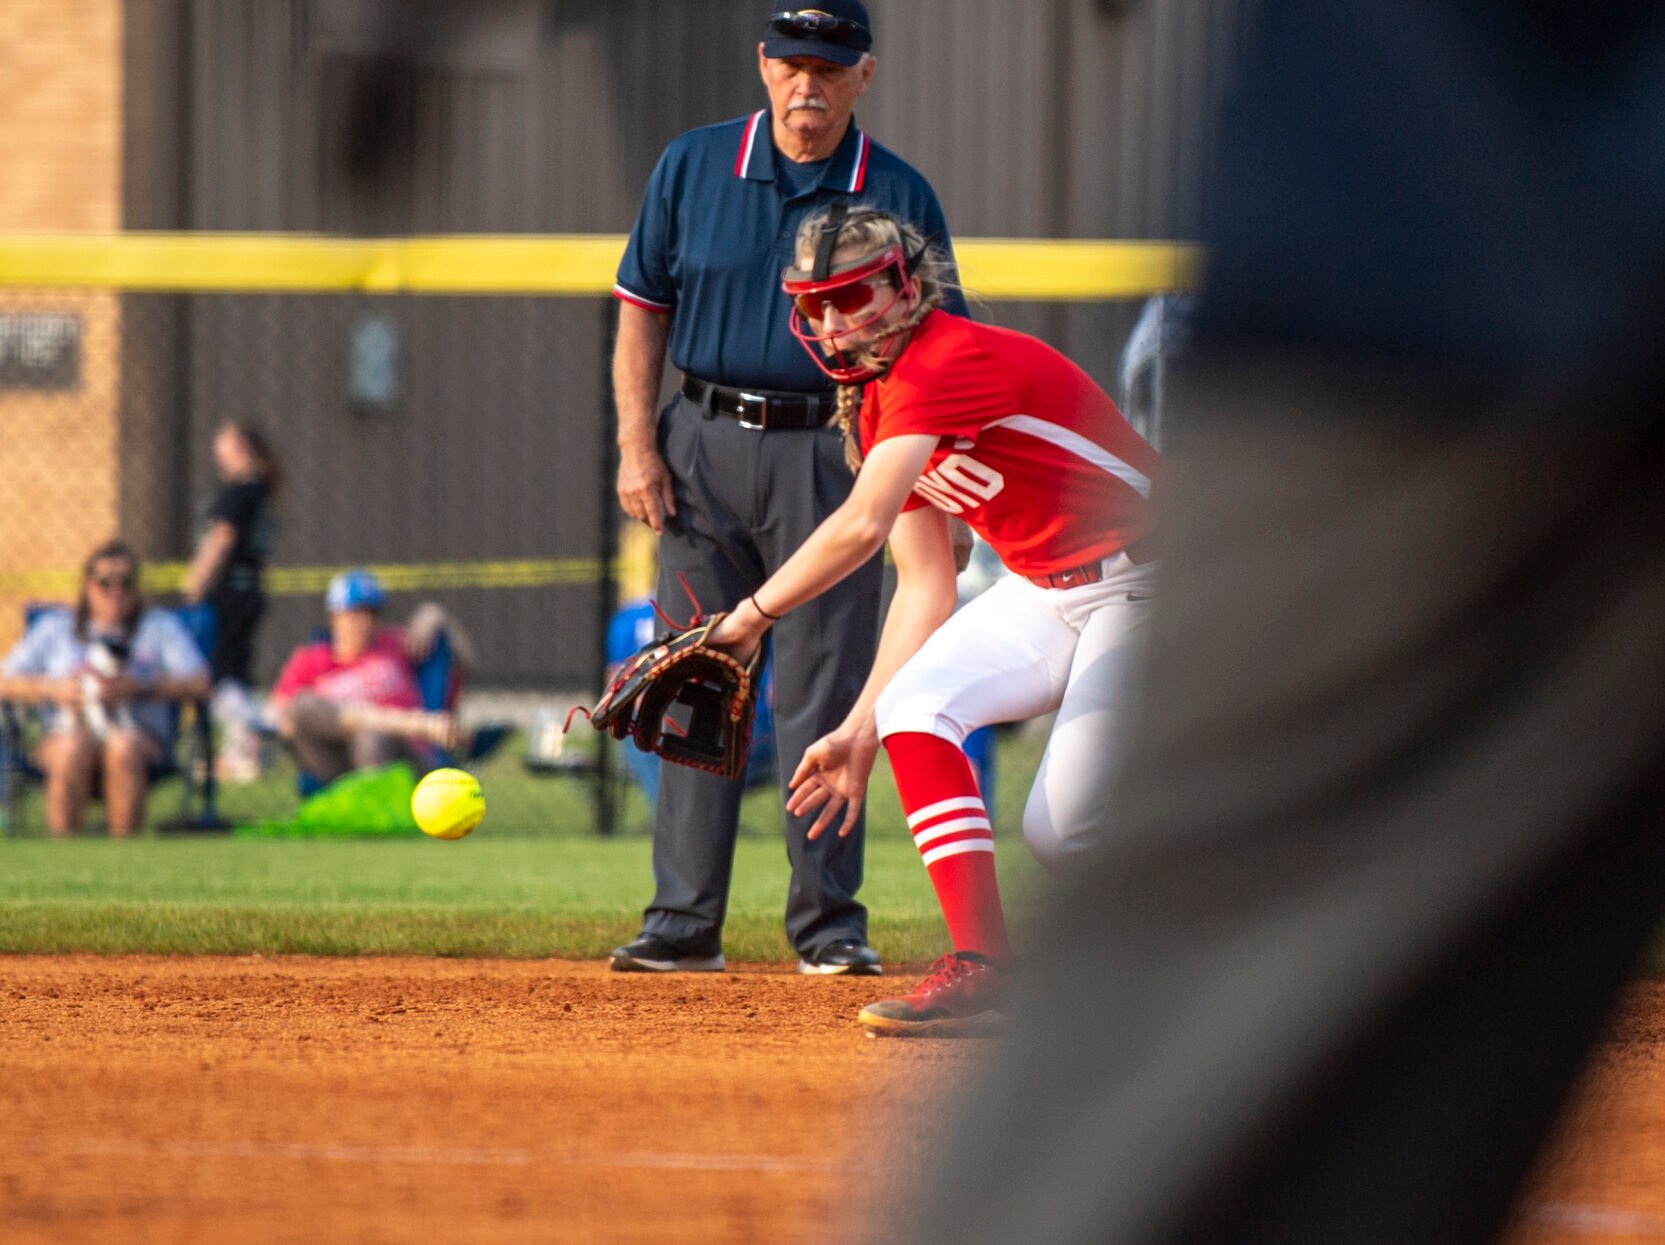 Tri-State Showcase: Ninth Edition Brings Top Softball Teams for Premier Competition